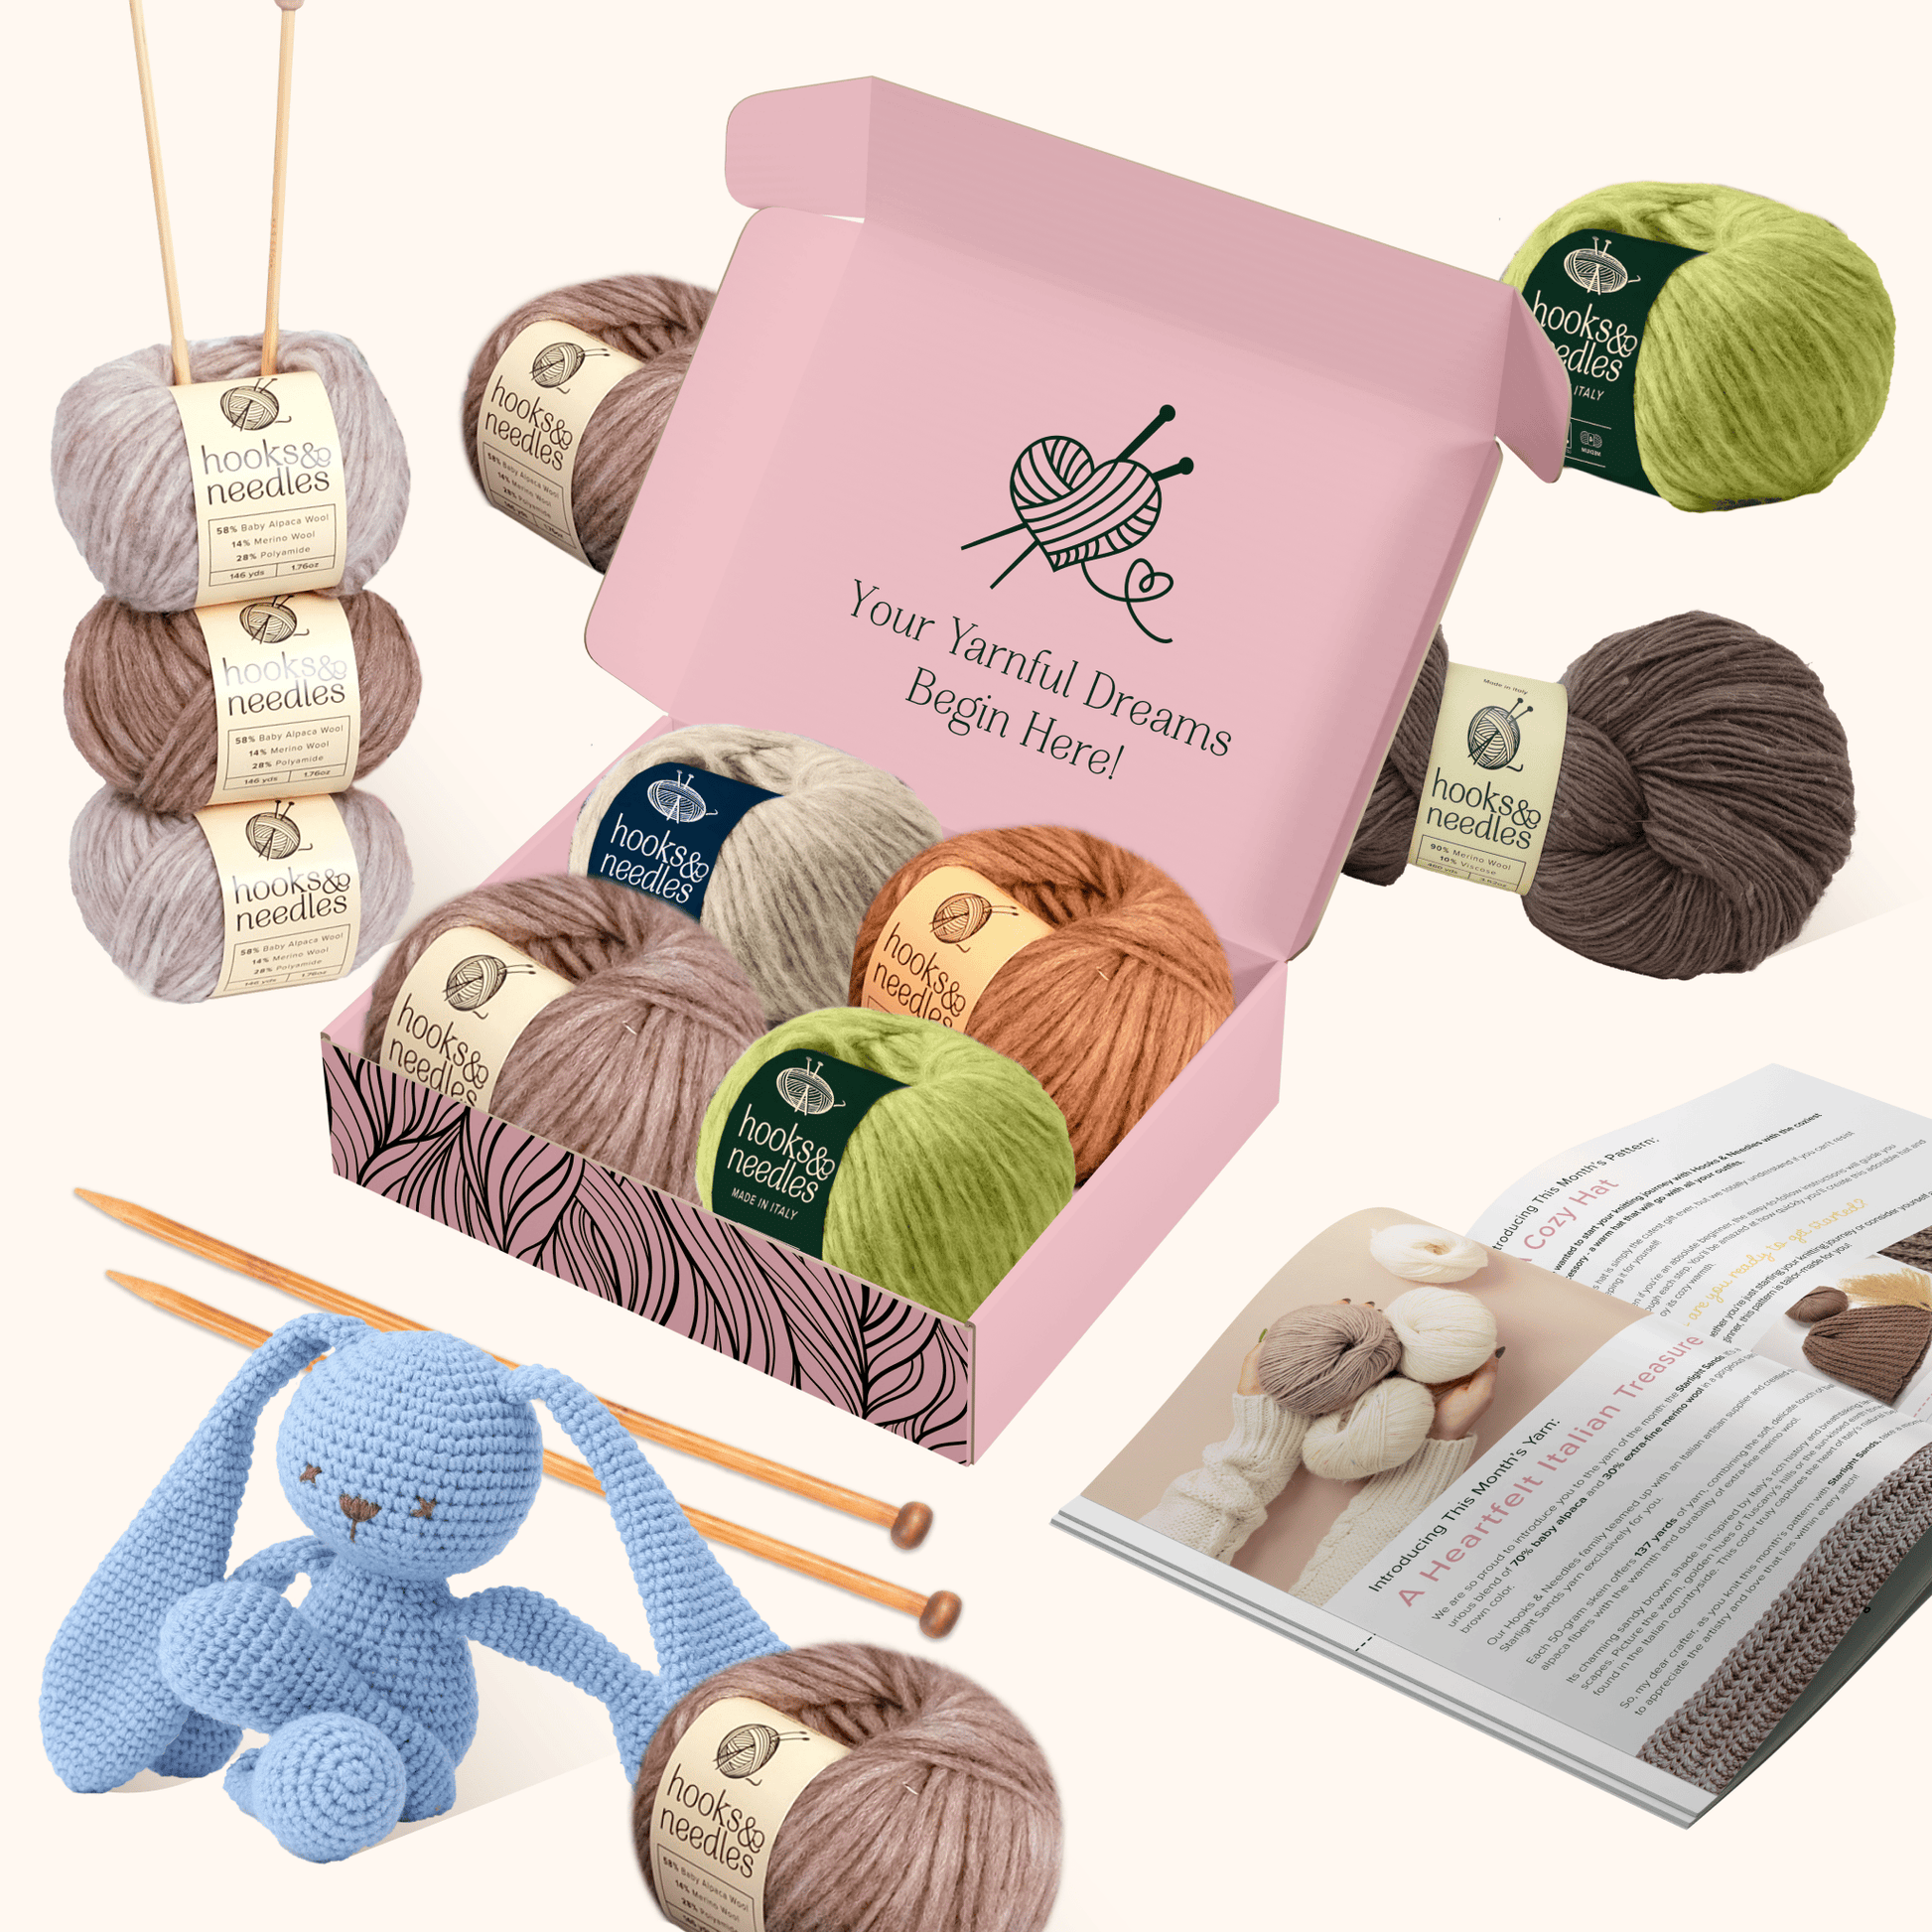 A crafting kit featuring yarn balls, knitting needles, a crochet hook, and a pattern book, with a completed blue crochet bunny and an open [6-Month-Prepaid] Hooks & Needles Subscription Box #24.